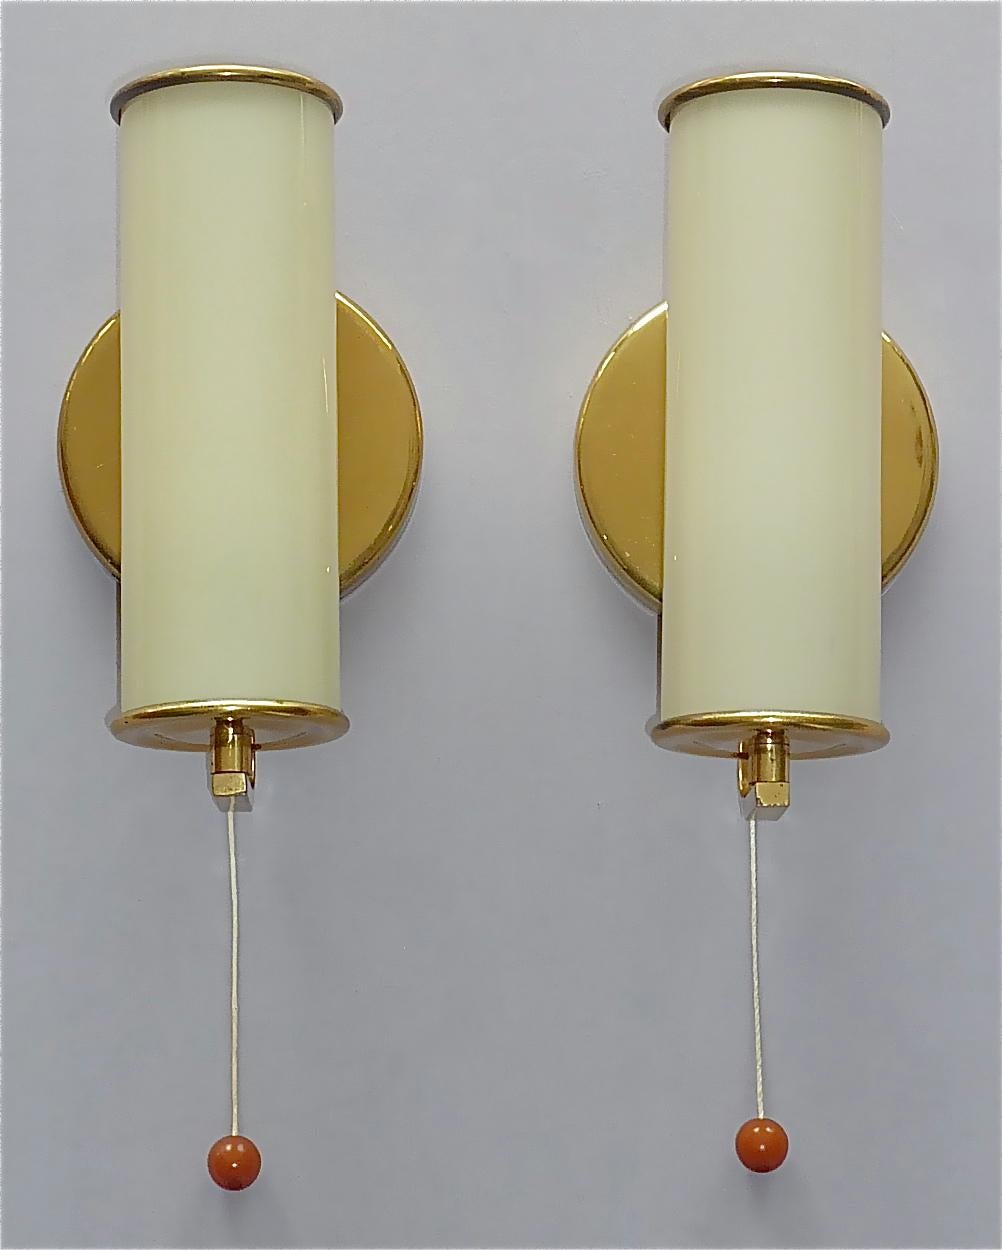 Beautiful german Bauhaus or Scandinavian modernist sconces in Paavo Tynell Taito Oy / Kalmar Style, circa 1930s to 1940s. The wall lights which are made of patinated brass with faint yellow opaline glass tubes and threat-switches with nice amber